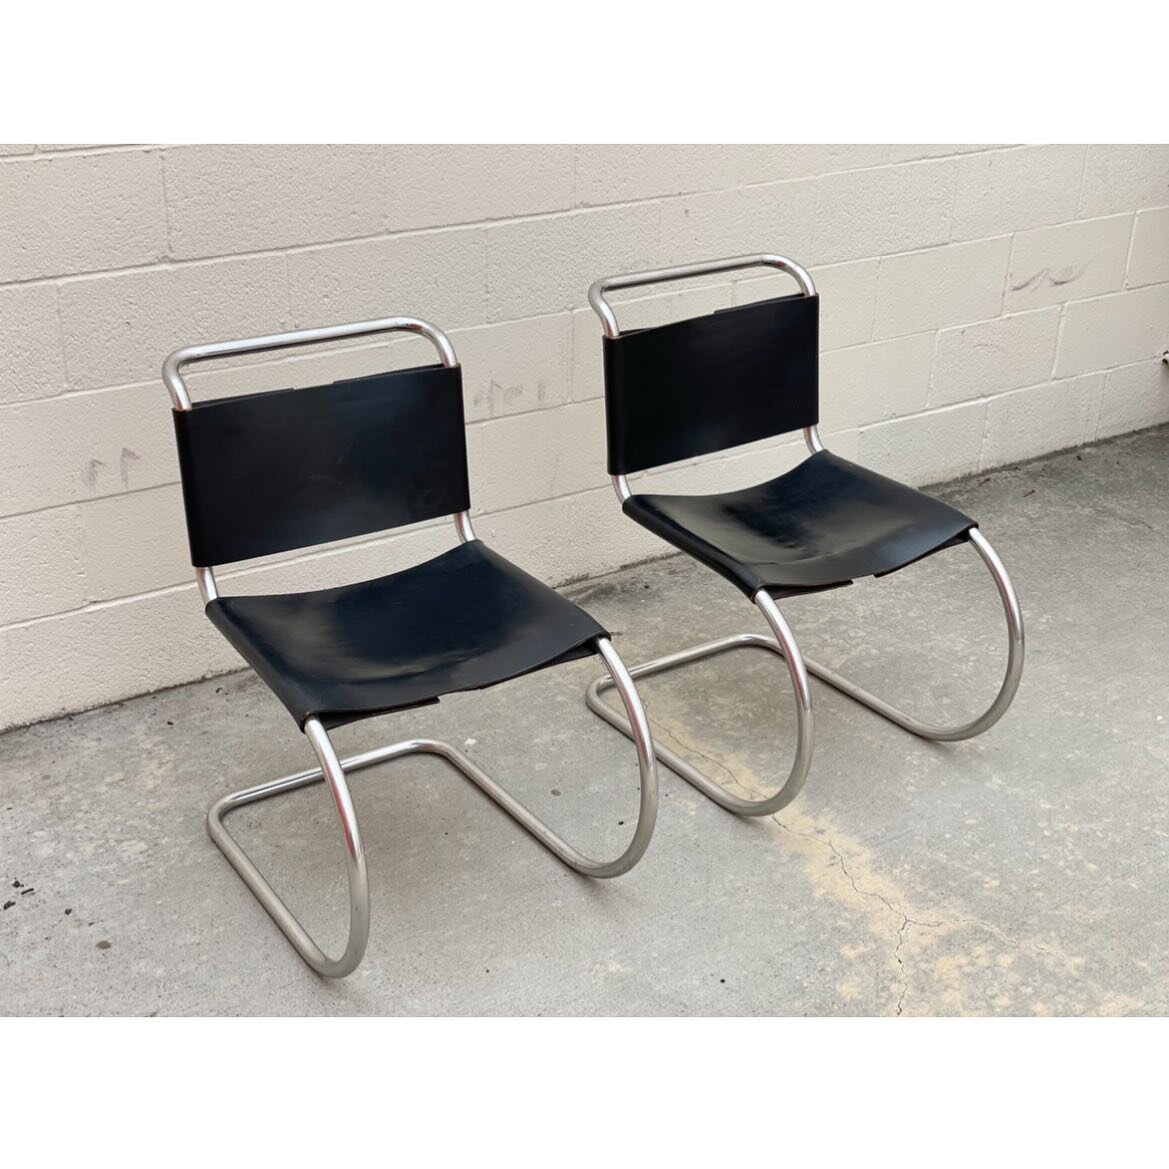 Ludwig Mies van der Rohe for Knoll International - A pair of 1970s cantilever MR10 chairs marked Knoll with vintage patina. 
$1300
.
.
#knollfurniture #mr10chairs #knollchairs #vintageknoll #midcenturymodernfurniture #miesvanderrohe #miesvanderrohech